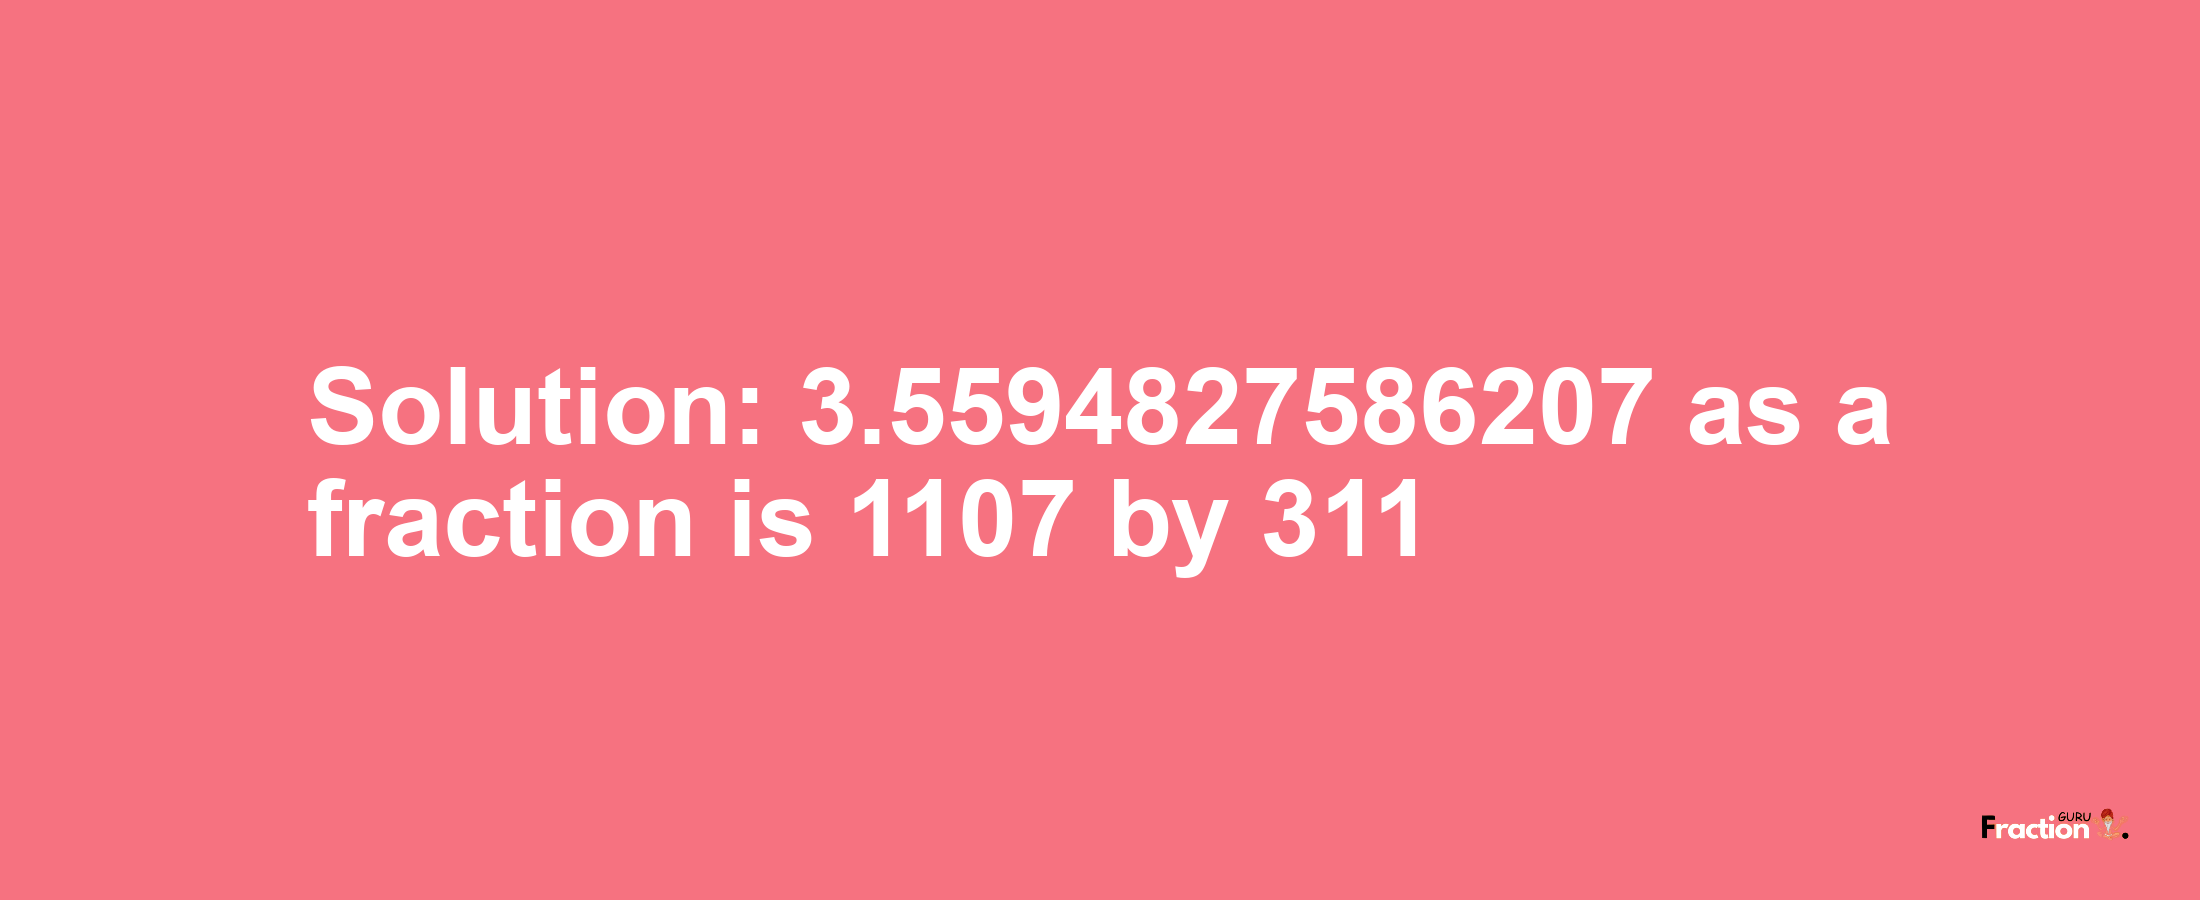 Solution:3.5594827586207 as a fraction is 1107/311